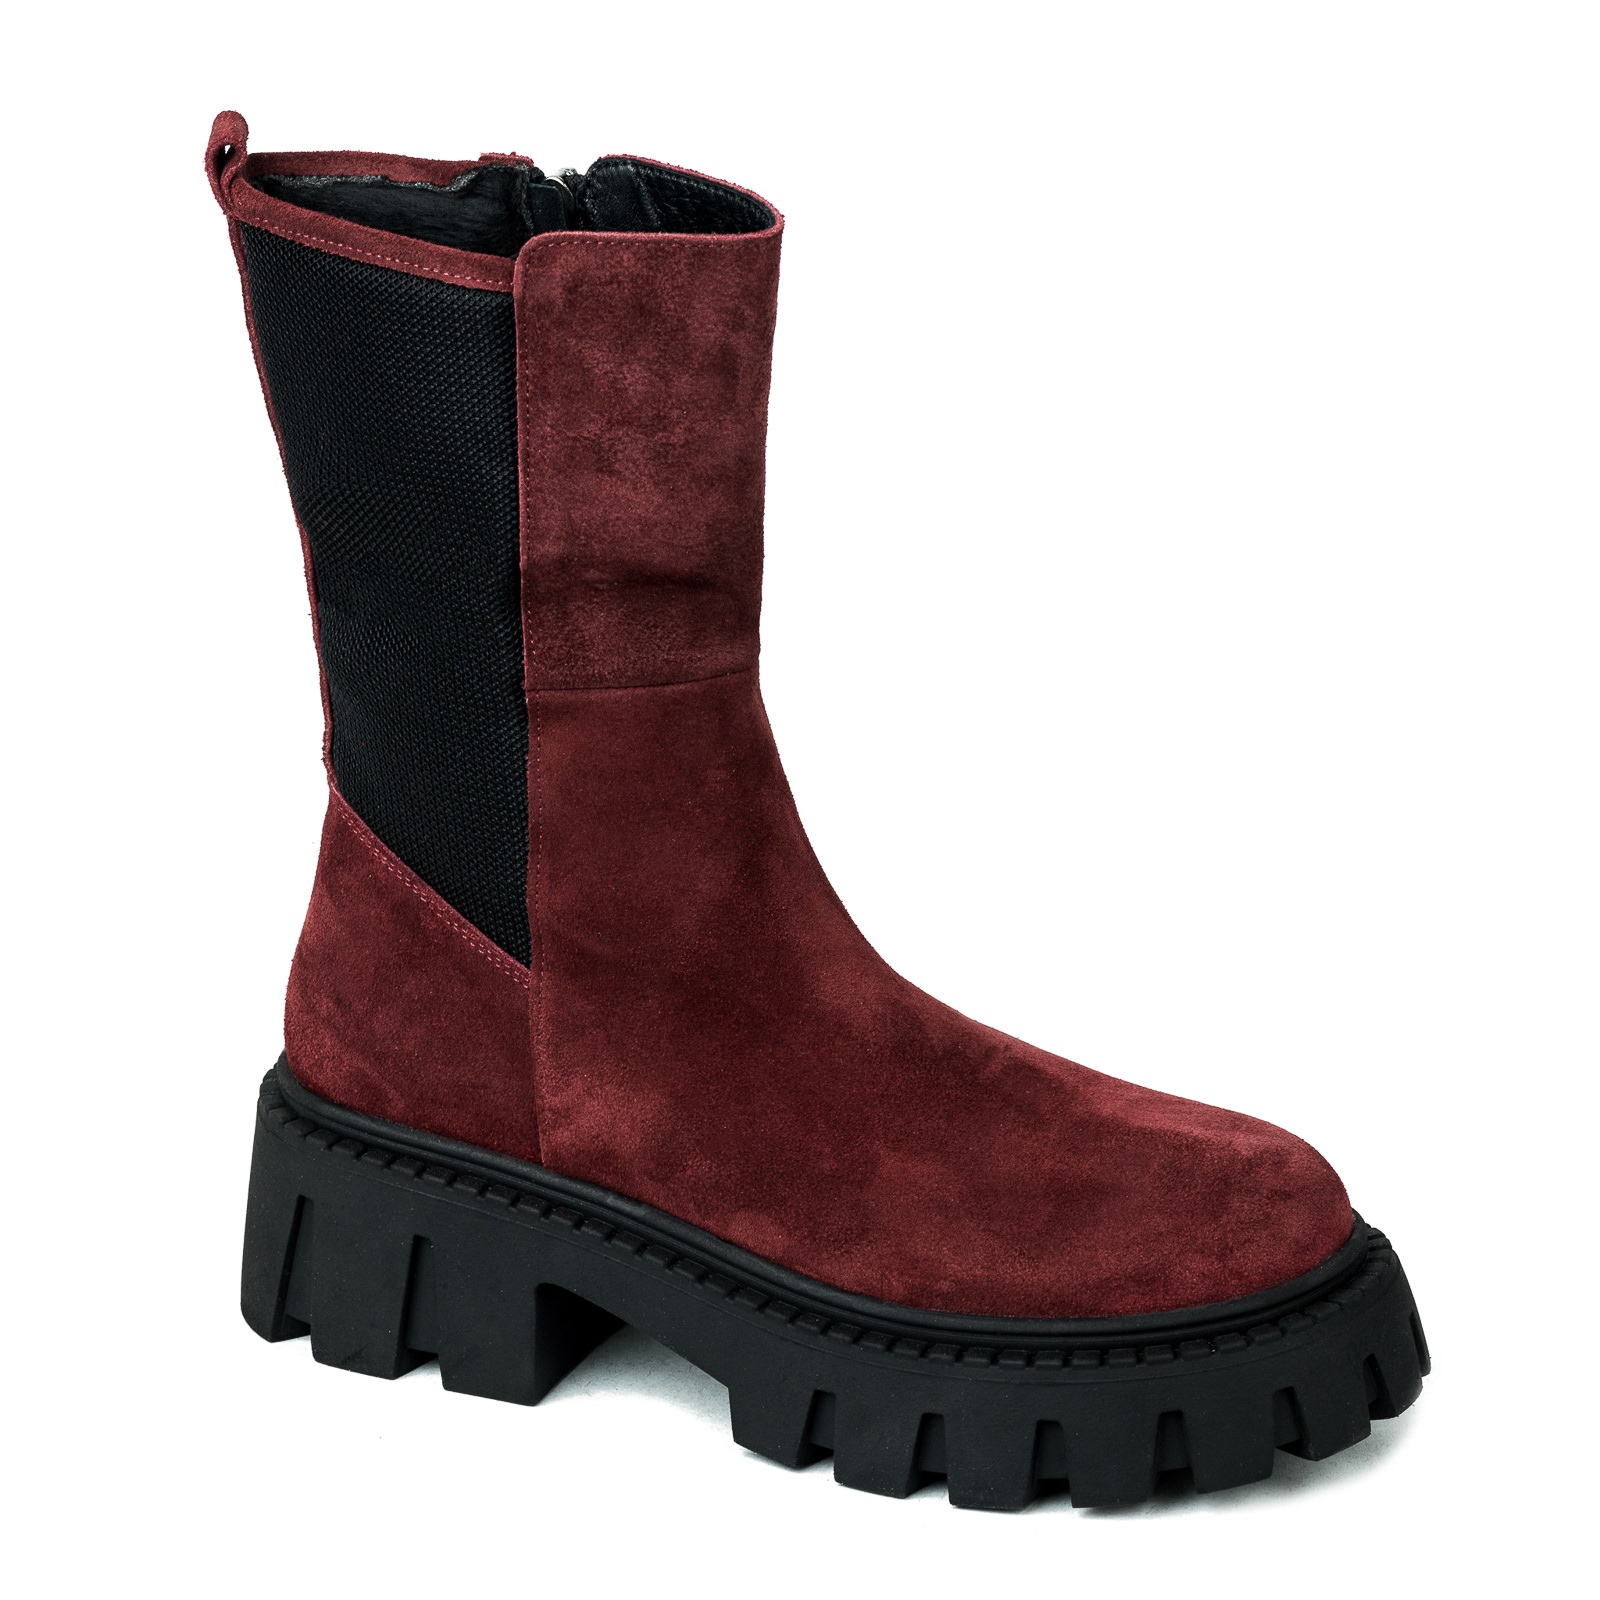 Leather booties B247 - WINE RED